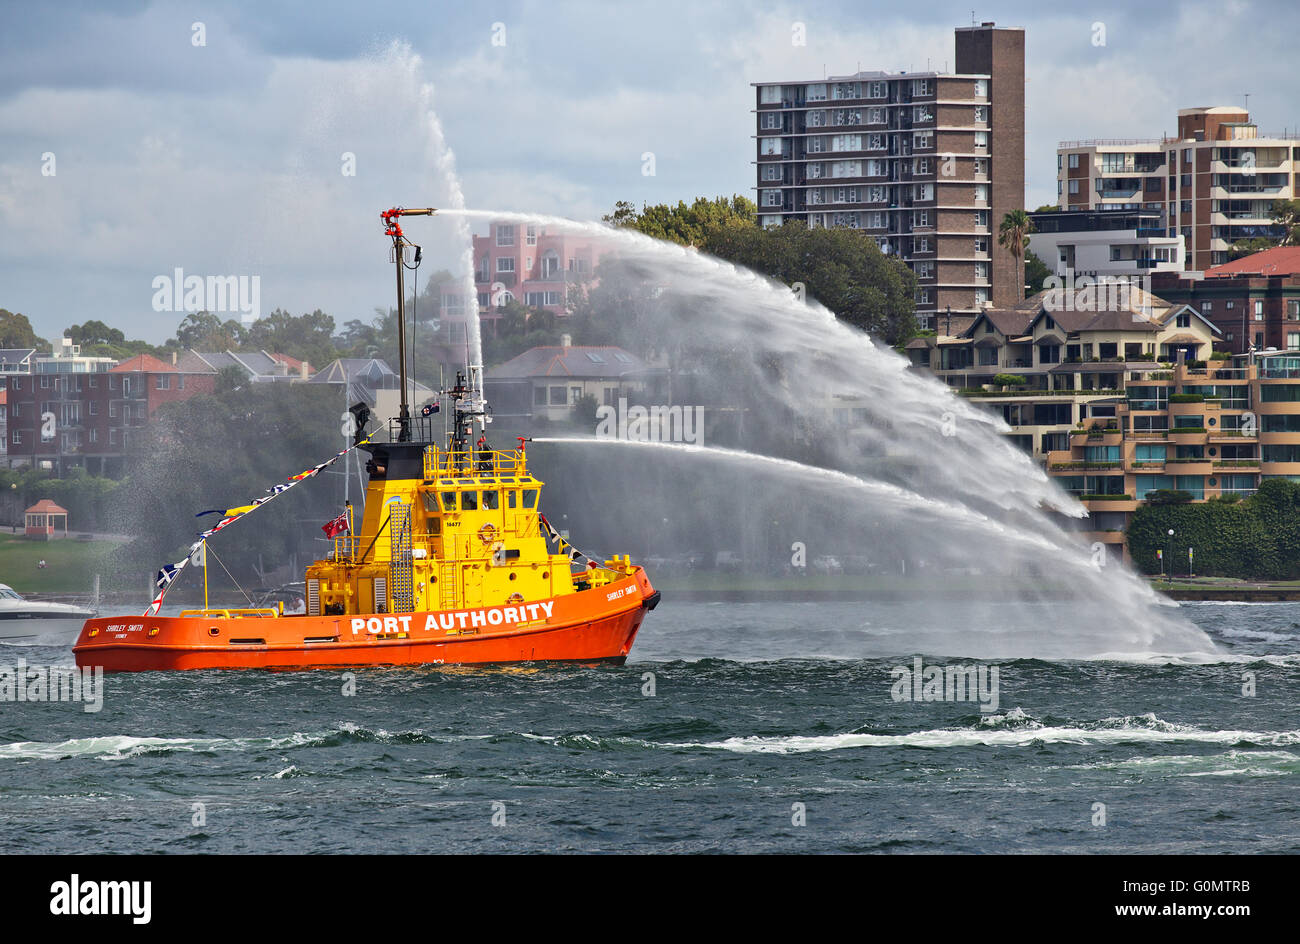 A firefighting tug boat in Sydney Harbour, shooting water into the air Stock Photo